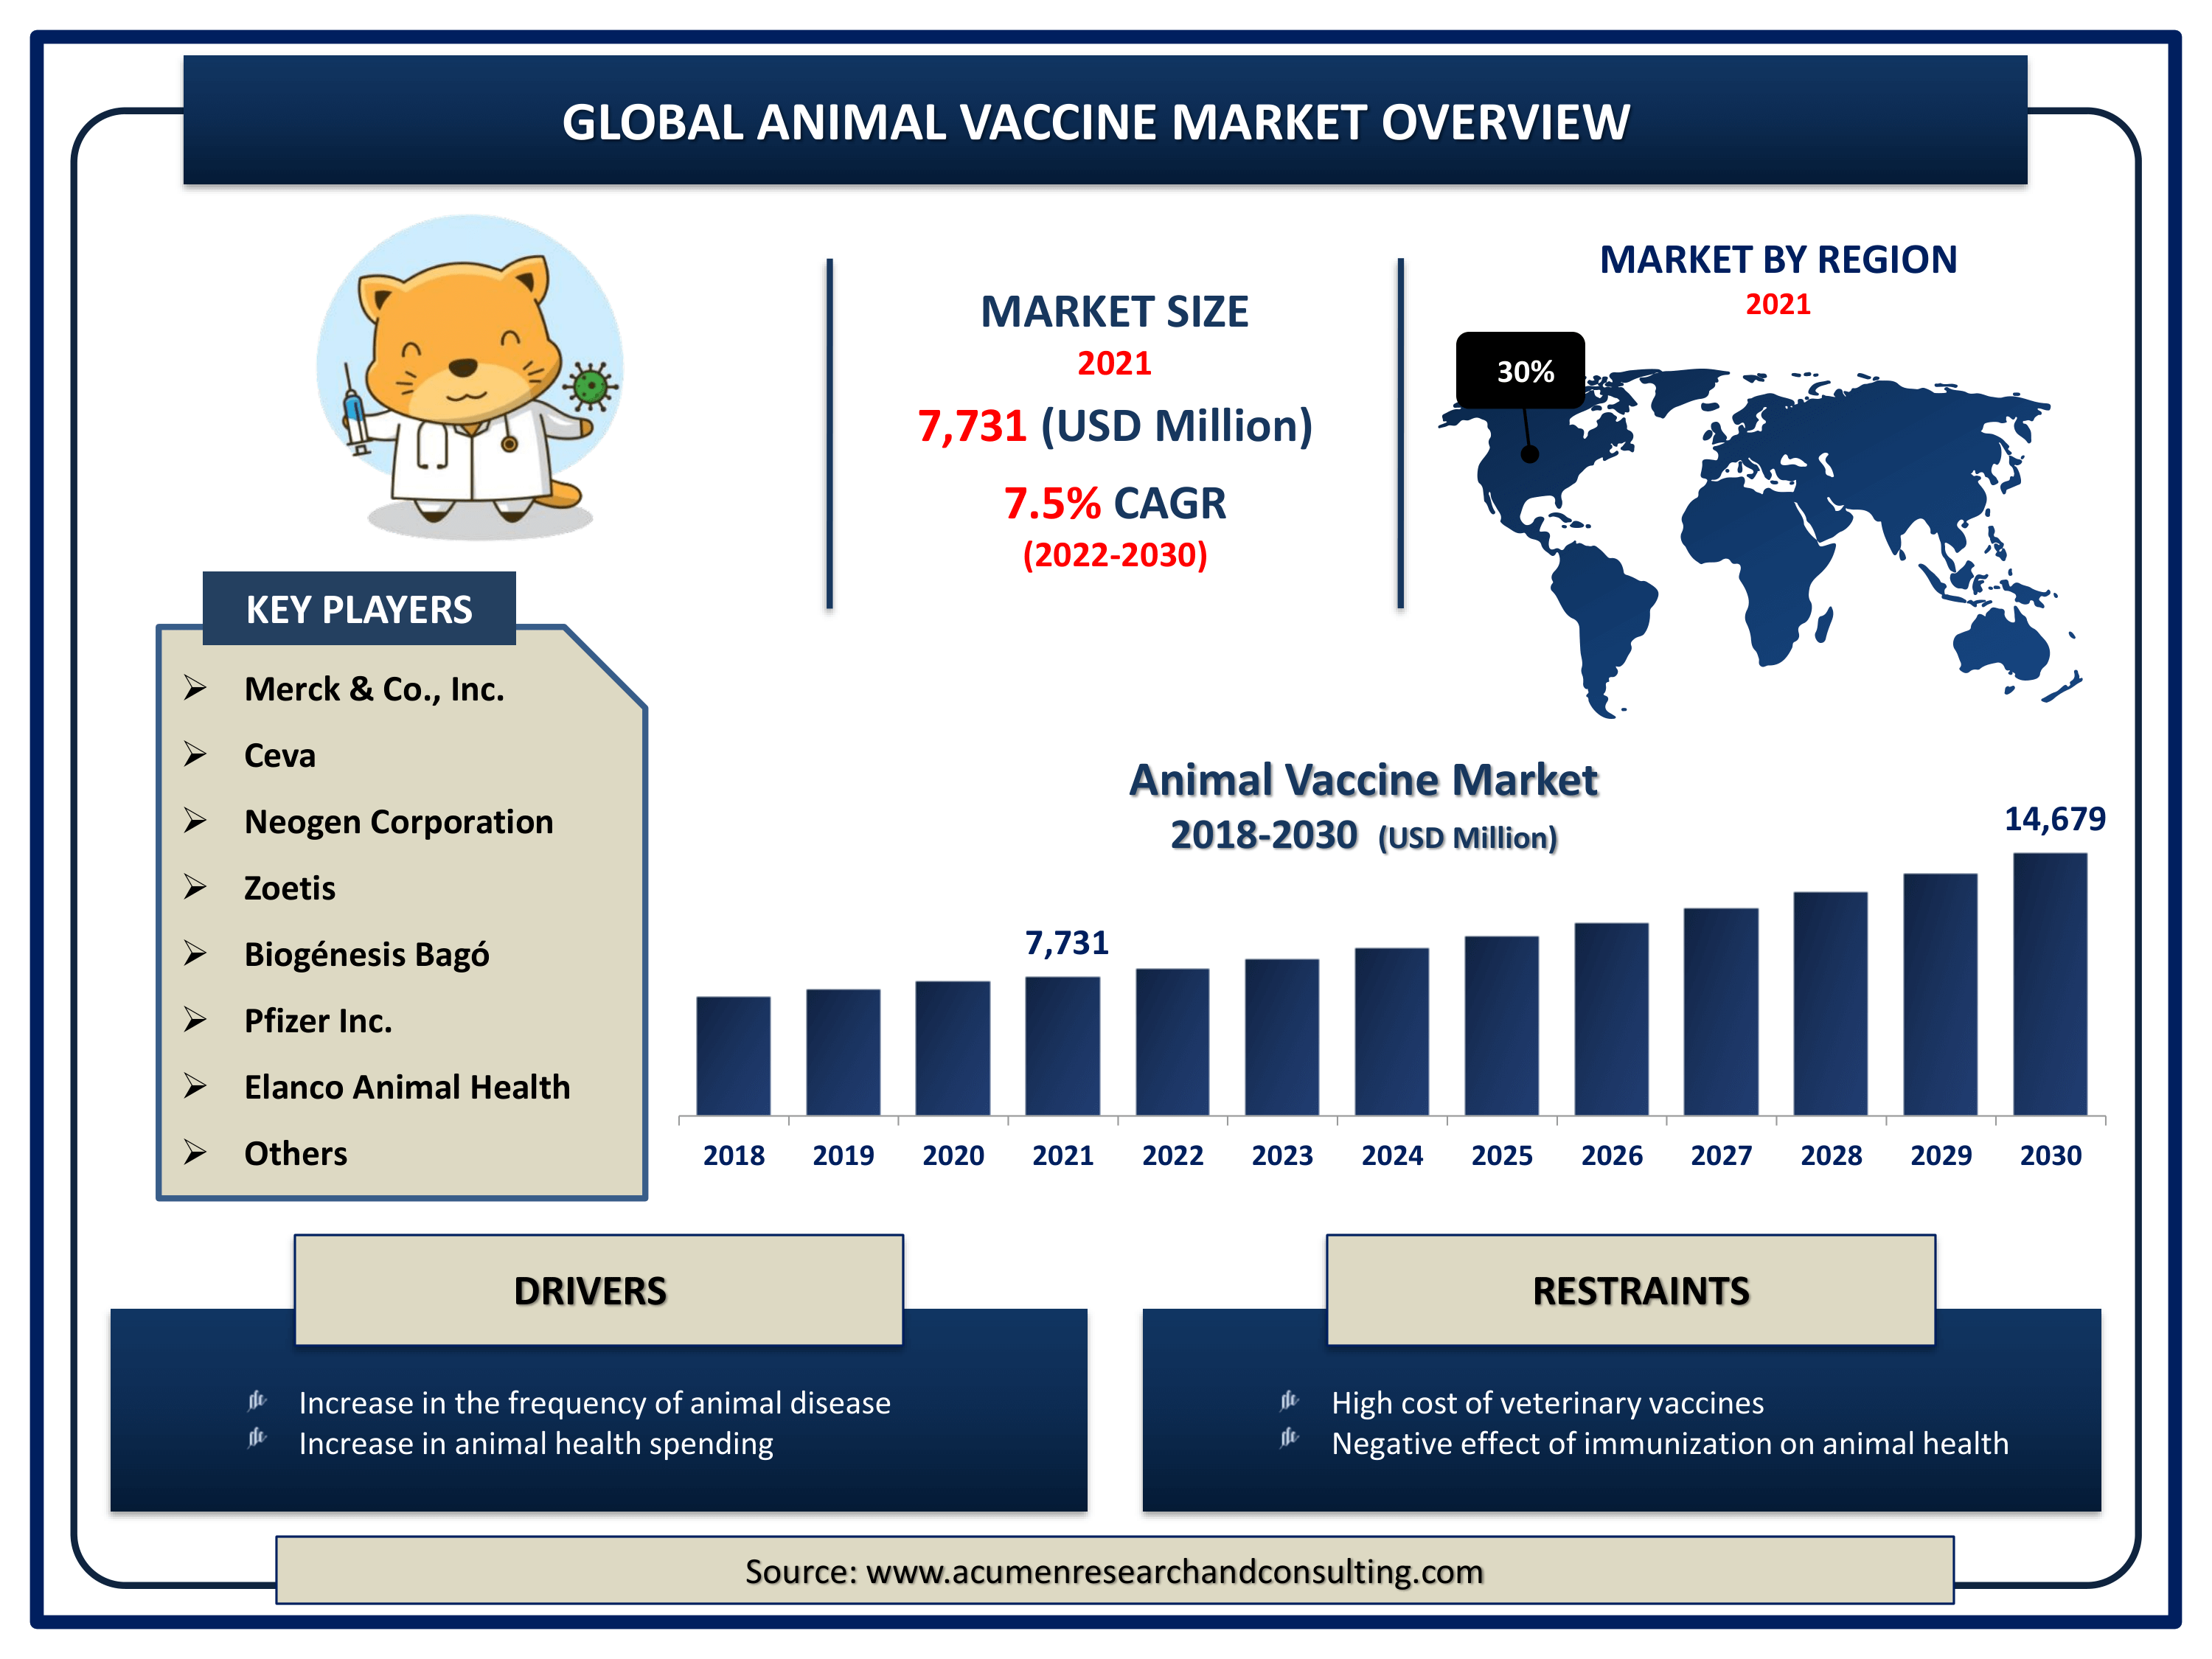 Global animal vaccine market revenue is estimated to expand by USD 14,679 million by 2030, with a 7.5% CAGR from 2022 to 2030.